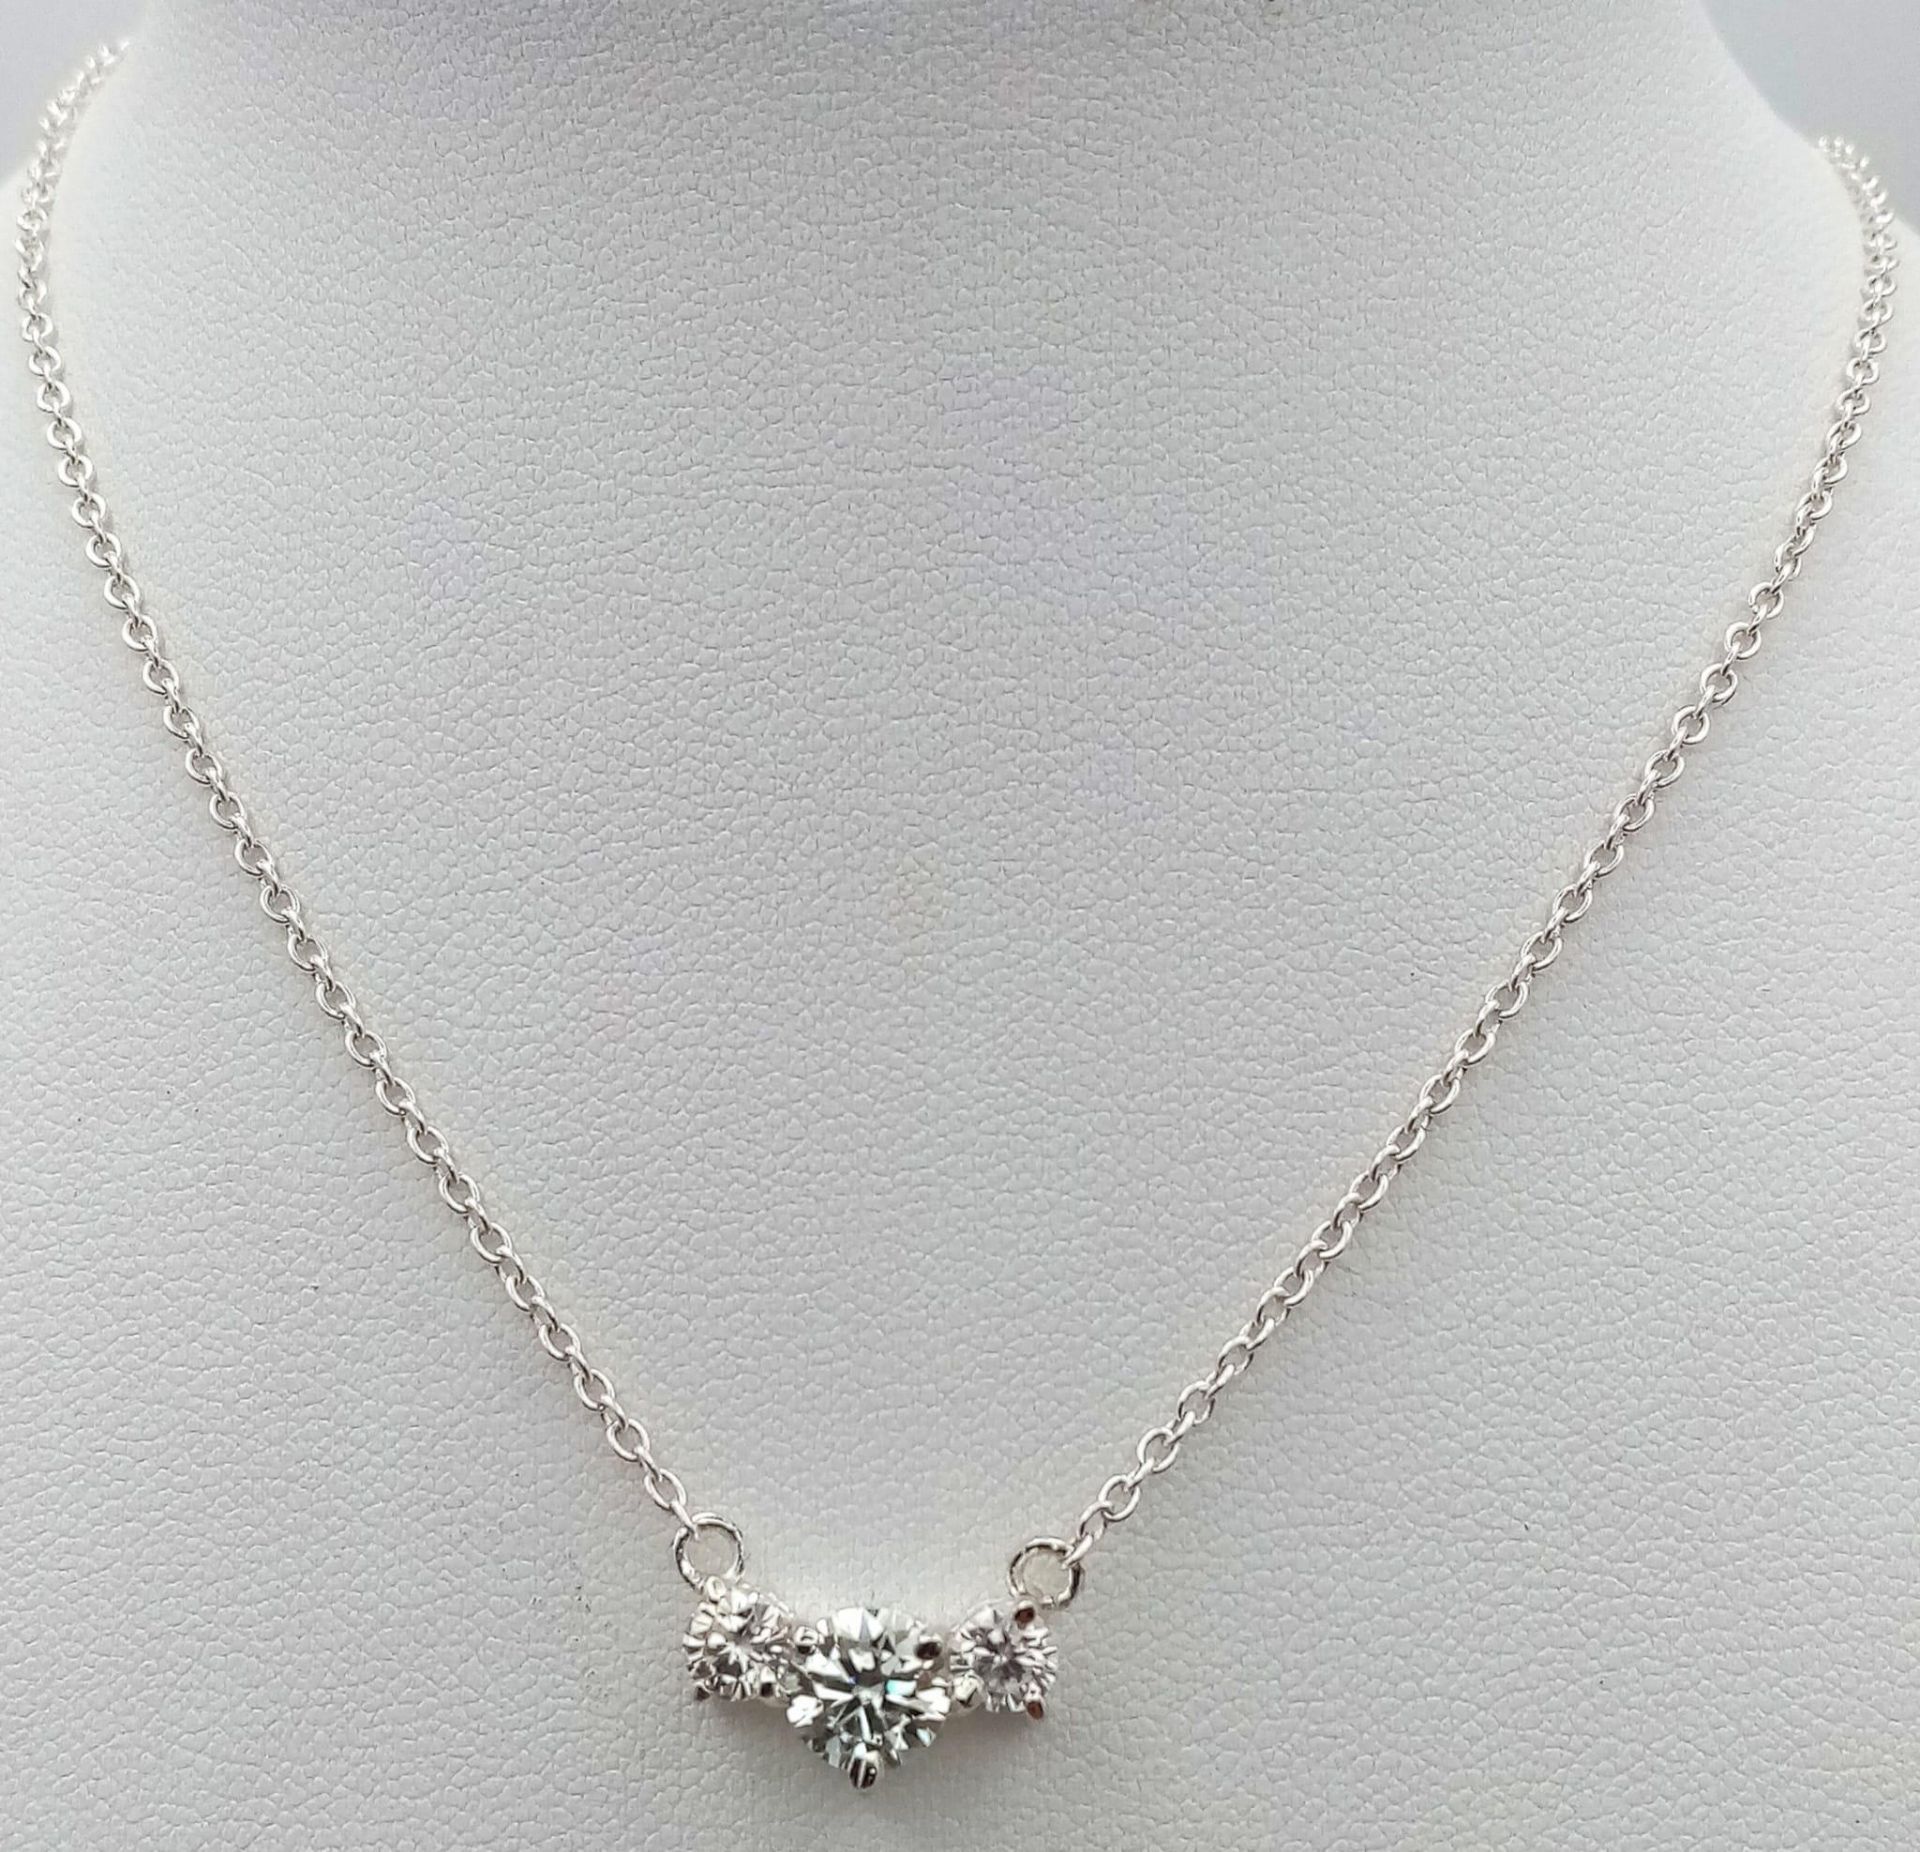 A Three Stone Moissanite Pendant on a Silver Chain and a matching pair of Moissanite Studs earrings. - Image 2 of 4